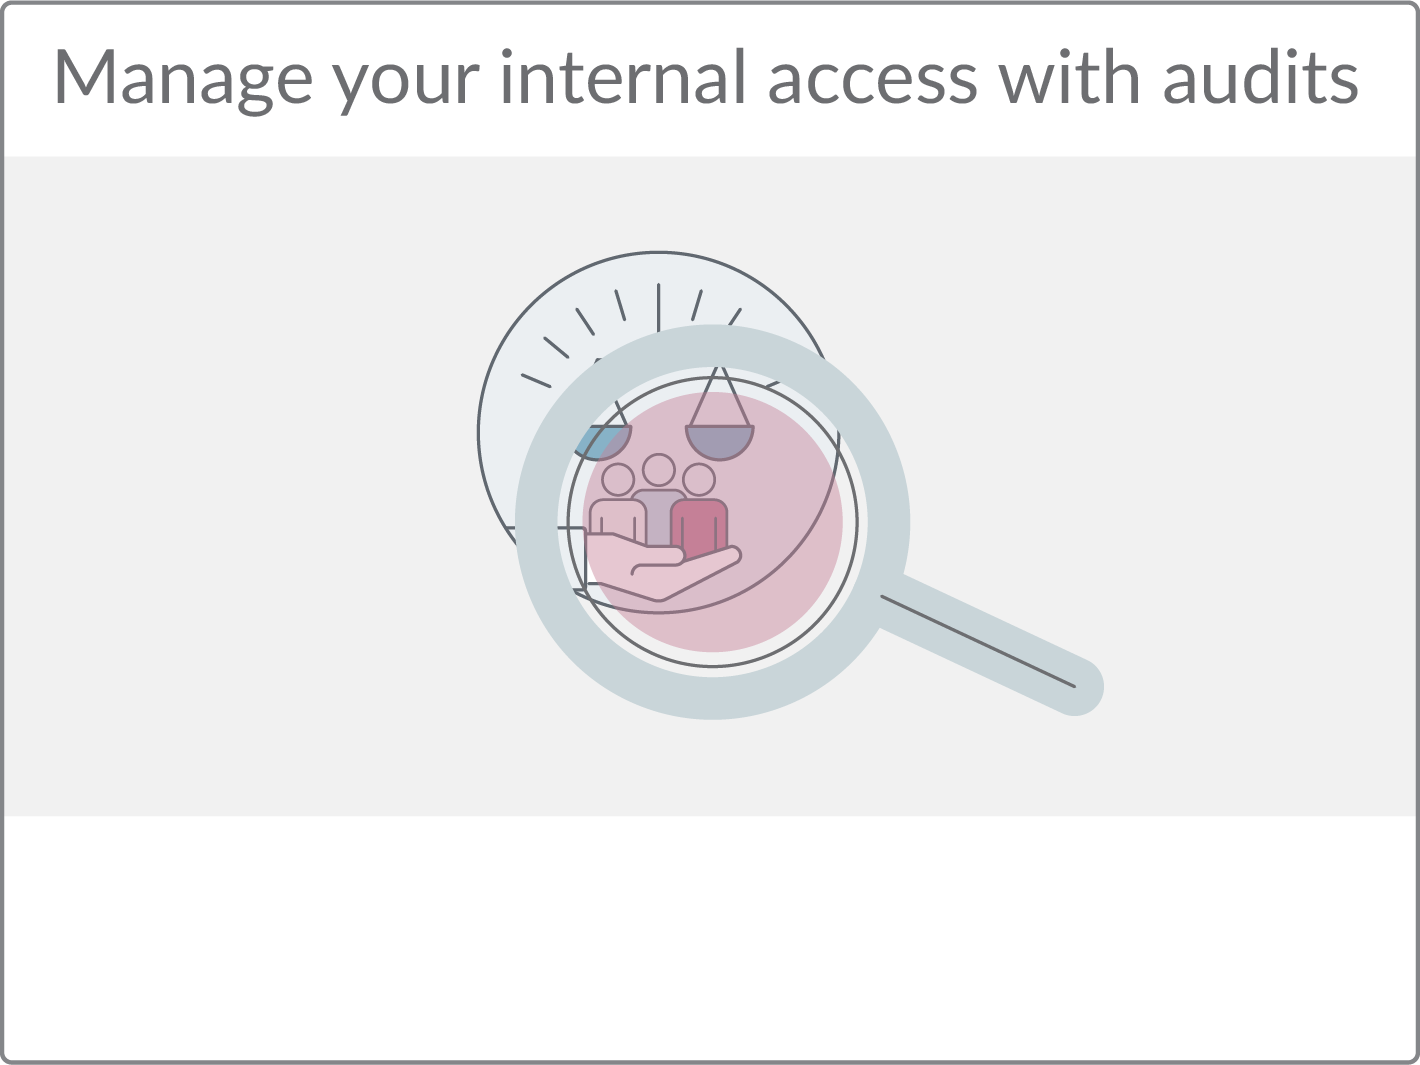 Manage your internal access with audits